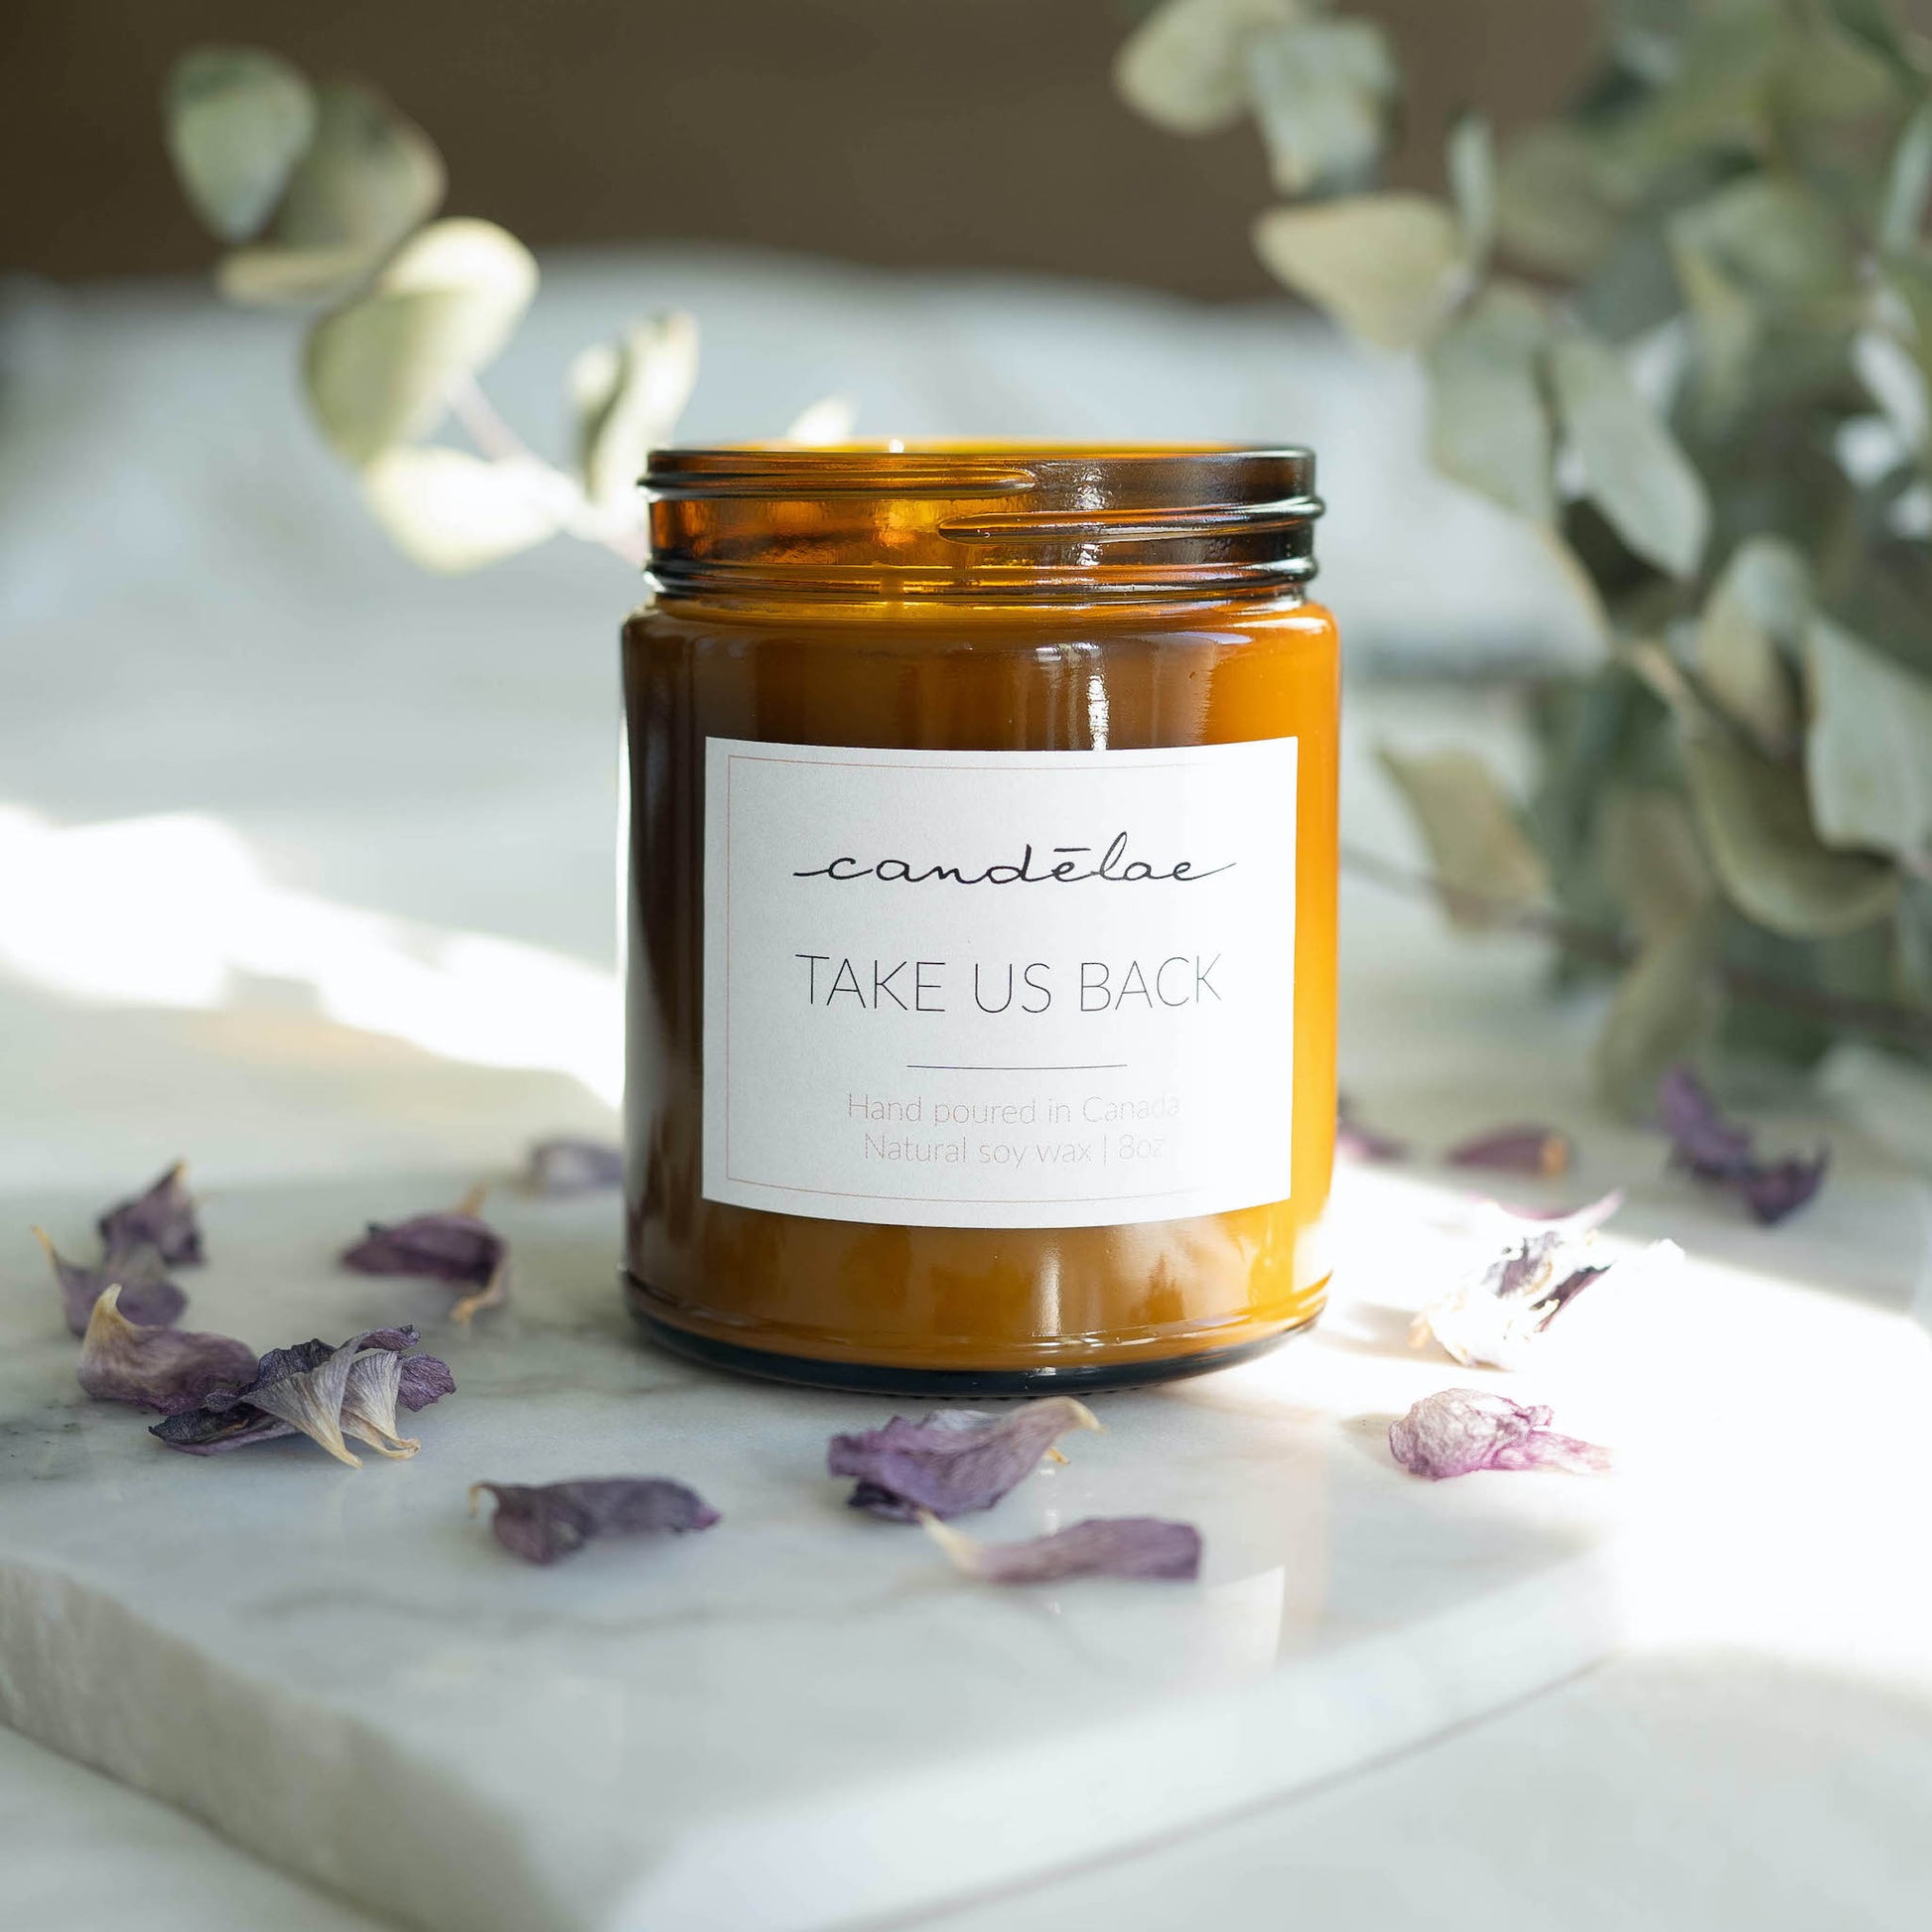 The soy wax candle by candēlae with notes of Bergamot and Frankincense is set around rose petals